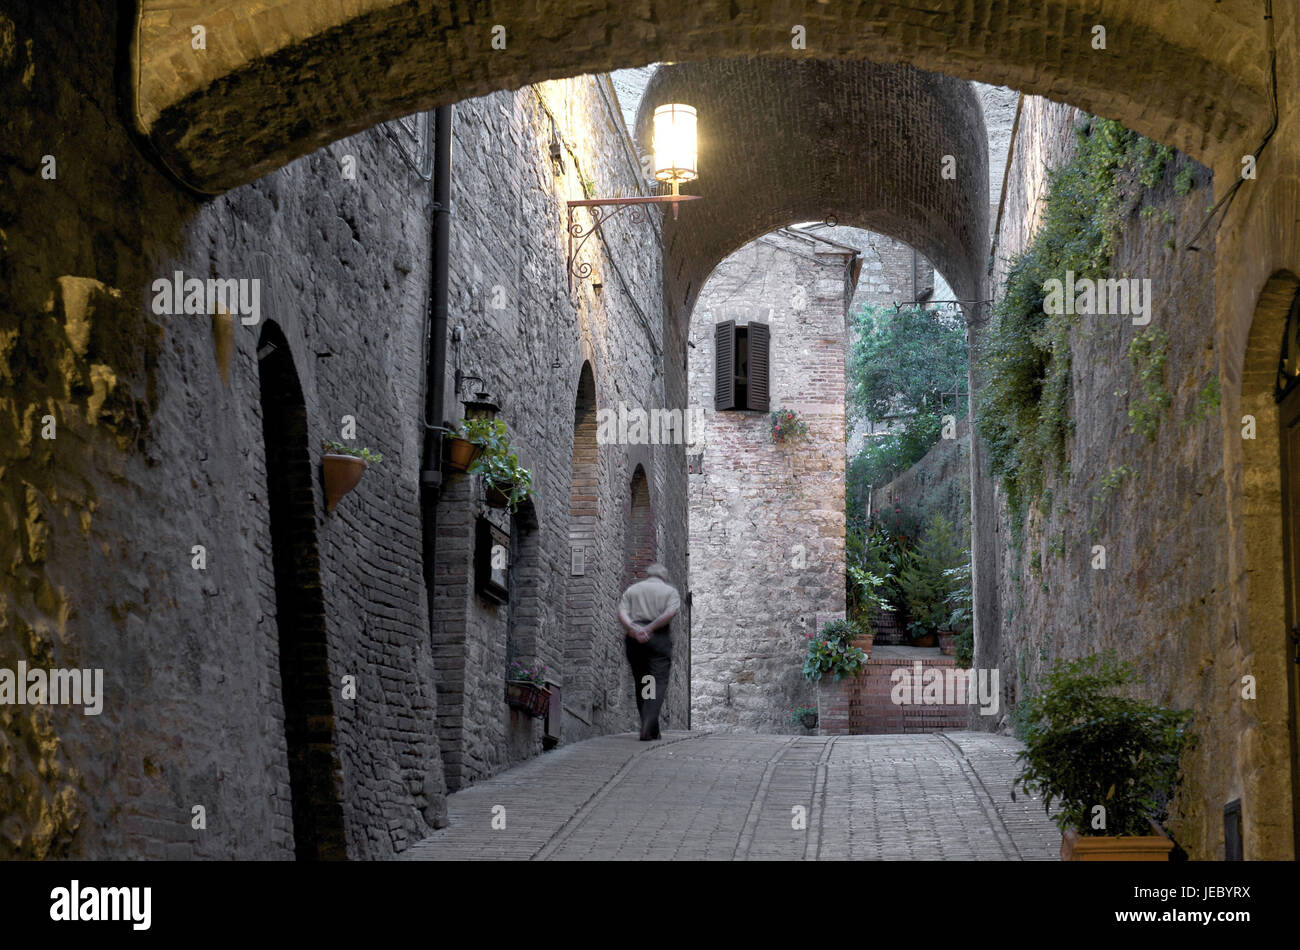 Italy, Tuscany, Val d'Elsa, San Gimignano, man in a lane in the evening, Stock Photo